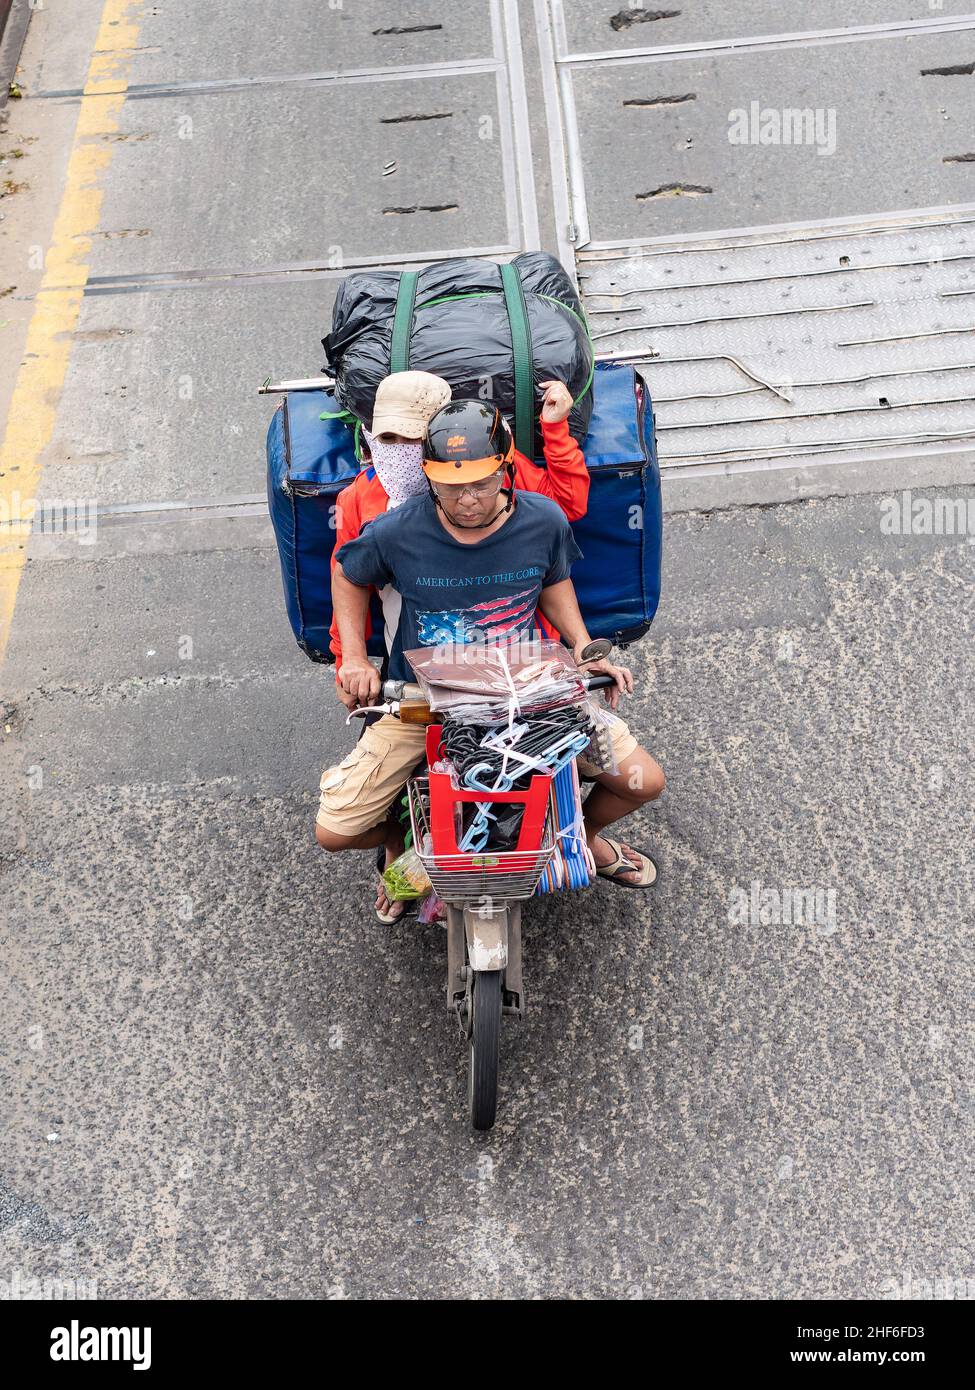 In Vietnam, motorcycles can often be seen carrying heavy loads. Here's an old bike in Ho Chi Minh City transporting two people plus products and equip Stock Photo